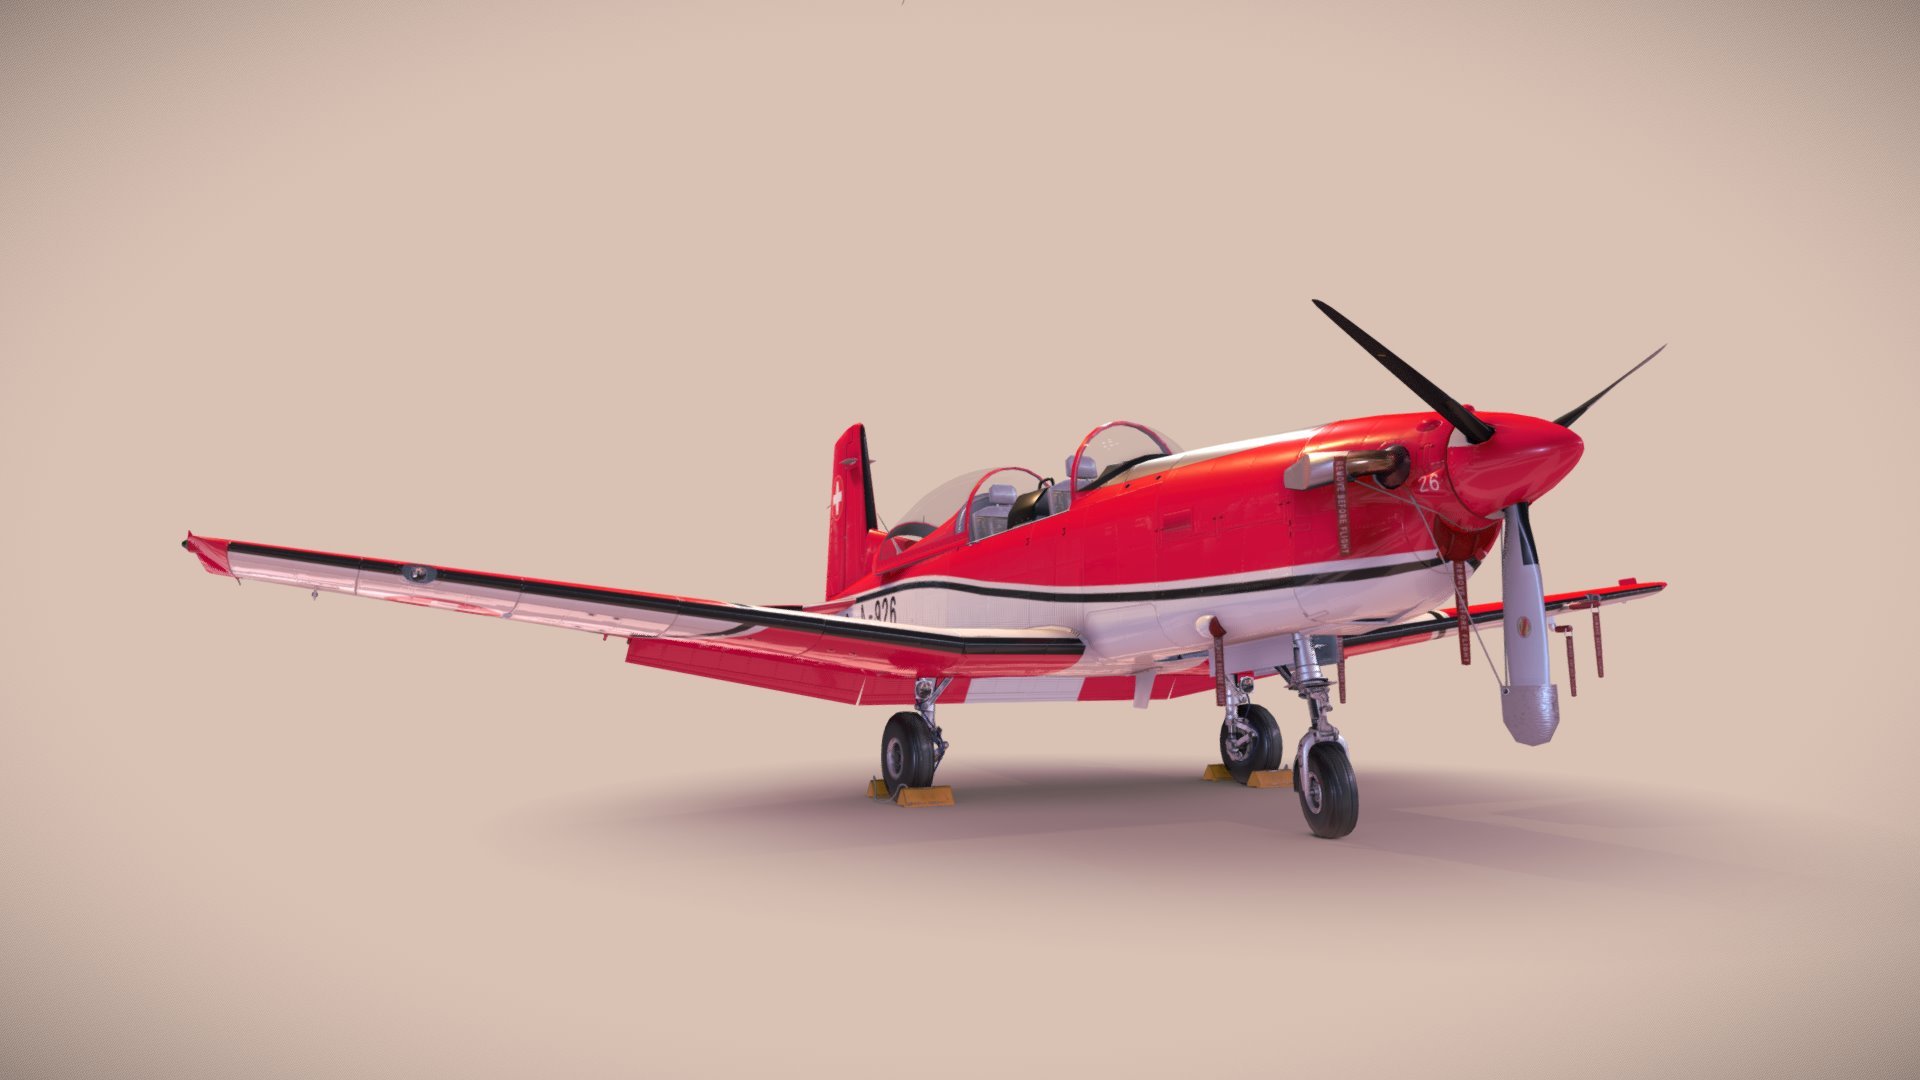 Low-poly 3D model airplane (Pilatus PC-7 Mk-I) with LODs 




Linked/Rigged (pivots apart) and animated 

Textures for PBR shader (Albedo, Specular, Gloss, AmbietOcclusion, NormalMap, Emissive, Opasity) size 4096x4096 

Сontains 6 LODs

Parking сovers

animation:
- CANOPY   (0 freme - open, 100 frame - close)
- PROP   (0-100 frame - one rotation)
- GEAR   (0 frame - down, 100 frame - up) + Shape animation for brake hoses
- GEAR_STOCK   (0 frame - max. up, 100 frame - max. down) + Shape animation for brake hoses
- GEAR_STEER   (0 frame - max. left, 100 frame - max. right)
- WHEEL    (0-100 frame - one rotation)
- AILERONS   (0 frame - max. left, 100 frame - max. right, 50 frame - neutral)
- RUDDER    (0 frame - max. left, 100 frame - max. right, 50 frame - neutral)
- ELEVATOR     (0 frame - max. dowm, 100 frame - max. up, 50 frame - neutral)
- FLAPS   (0 frame - up, 100 frame - max. down)

If you have questions about my models or need any kind of help, feel free to contact me and i'll do my best to help you 3d model